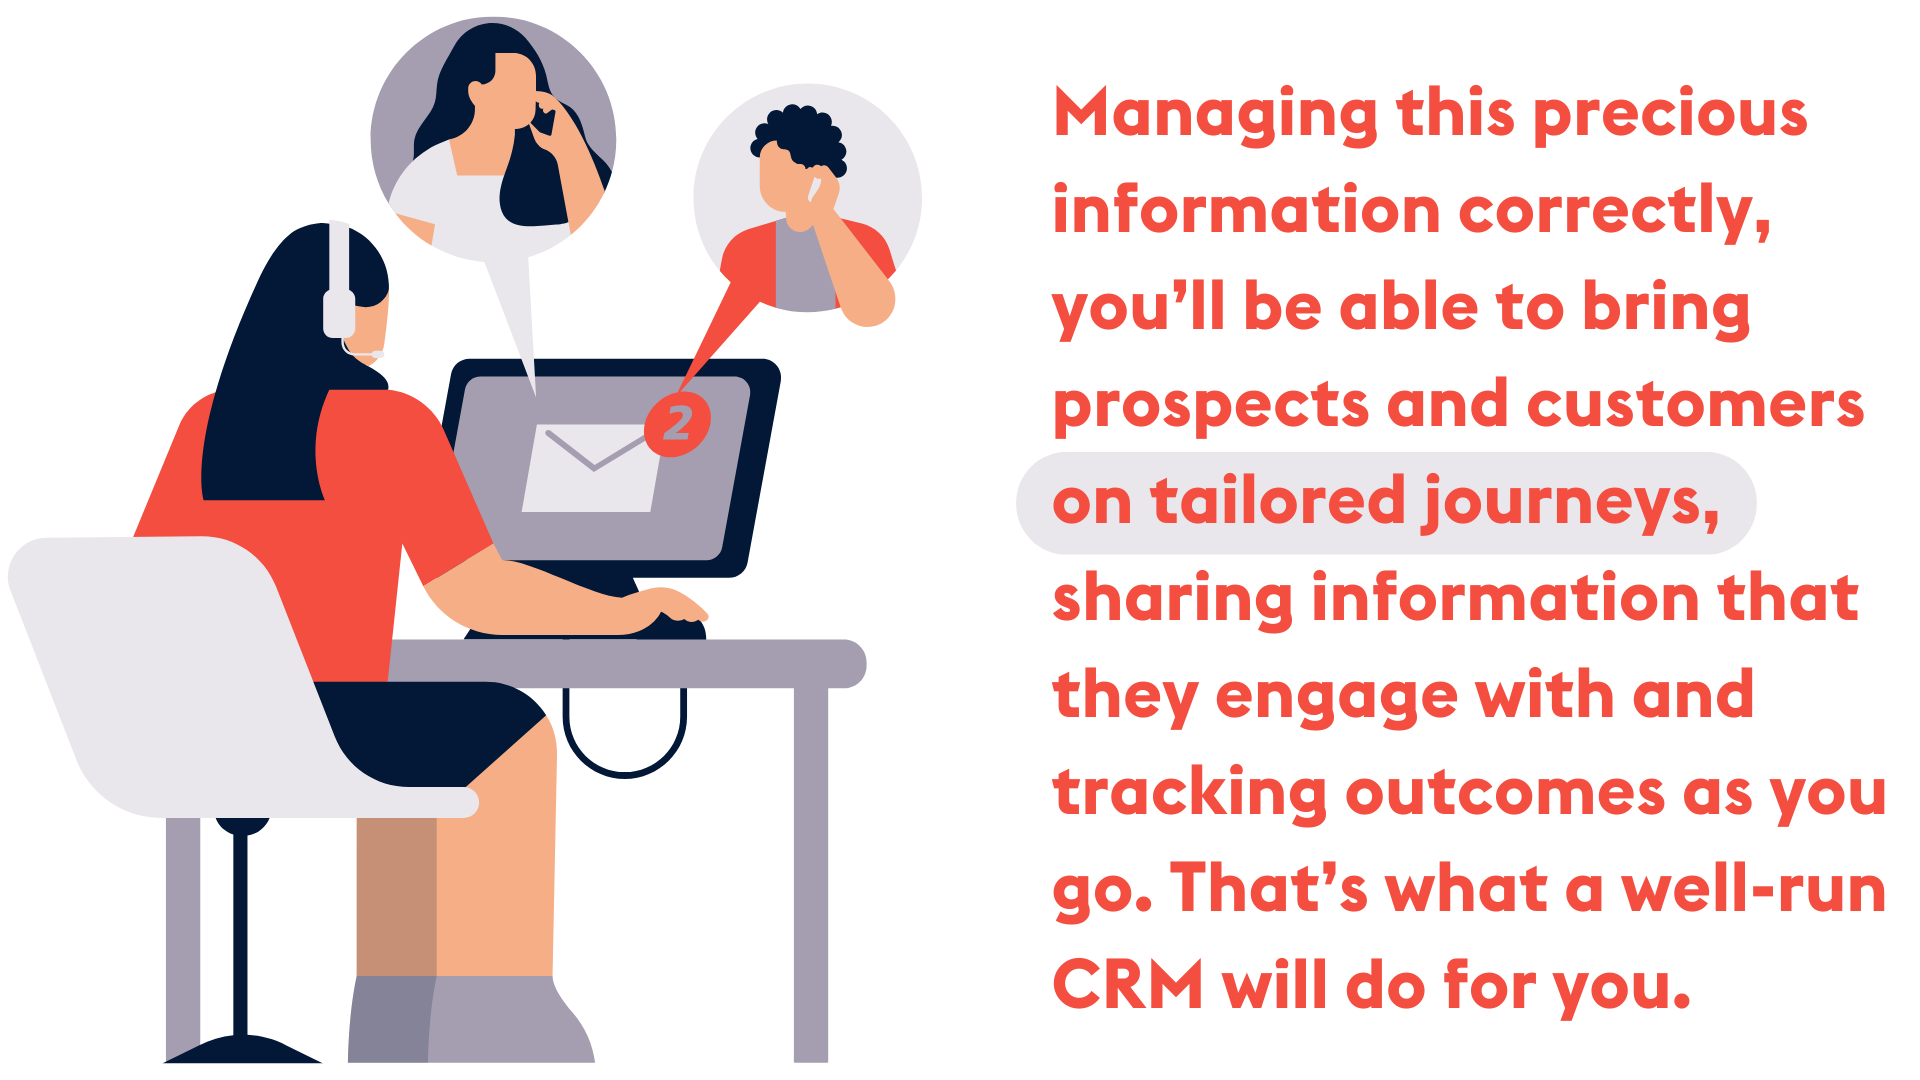 ProvidentCRM-CRM-Managing-Information-Correctly-for-Tailored-Customer-Journey